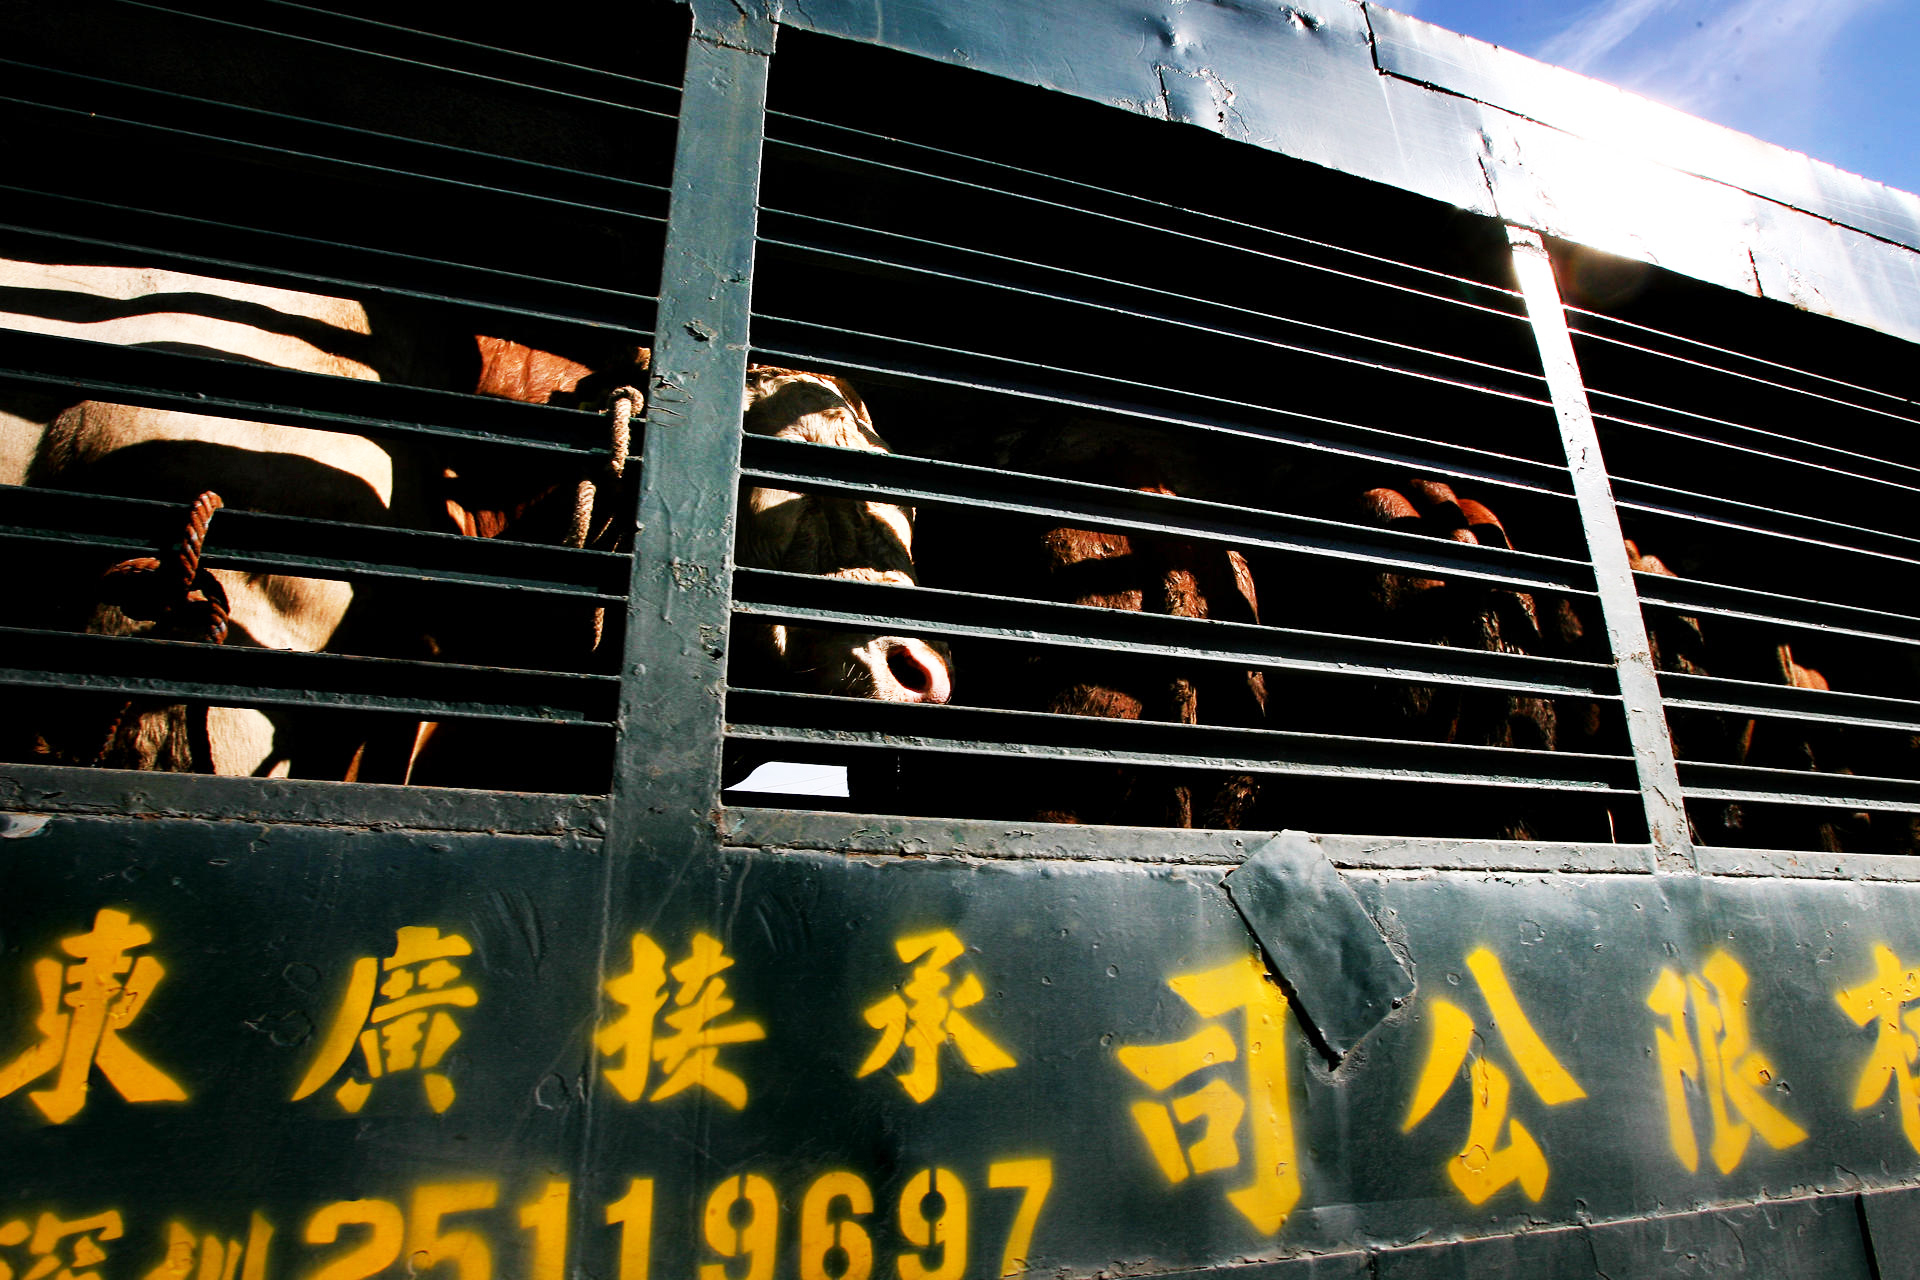 Ng Fung Hong imported 23,194 head of cattle last year.